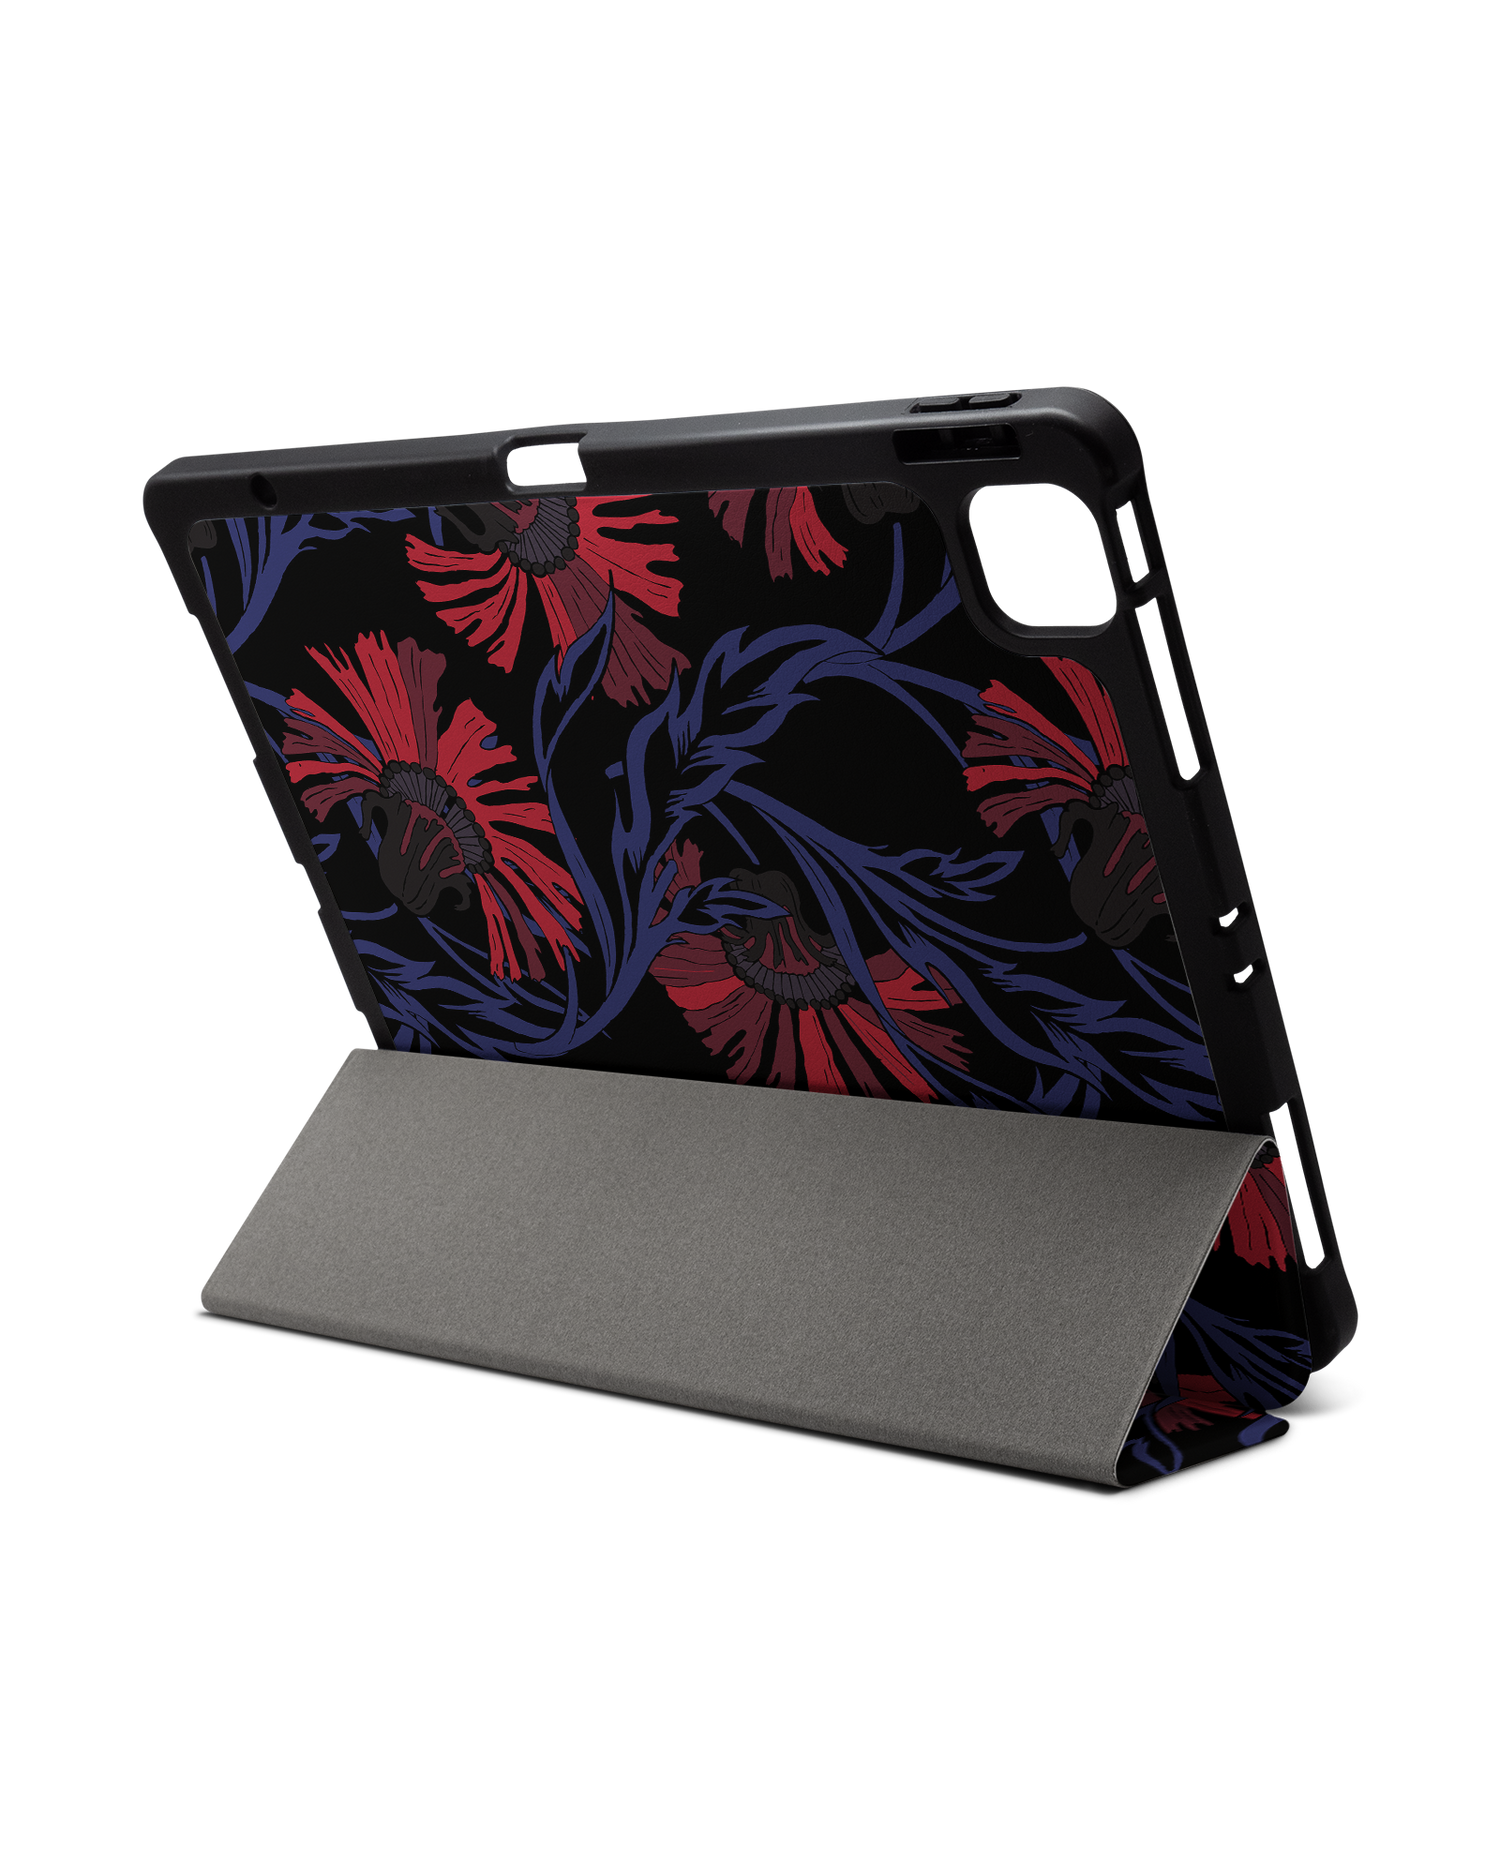 Midnight Floral iPad Case with Pencil Holder for Apple iPad Pro 6 12.9